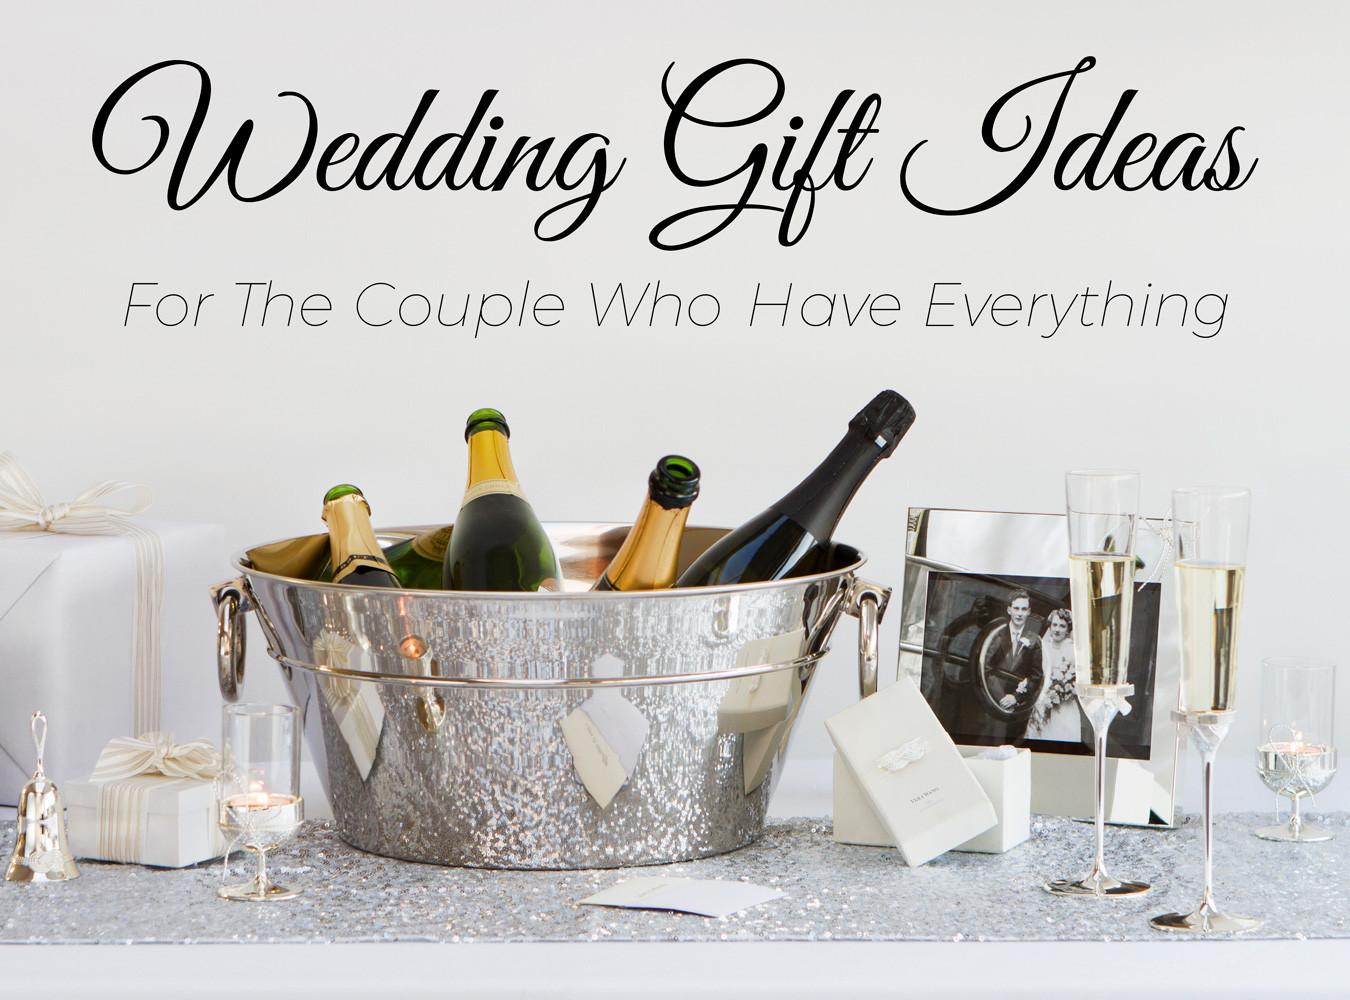 Gift Ideas For Older Couples
 Top 20 Wedding Gift Ideas for Older Couples Second